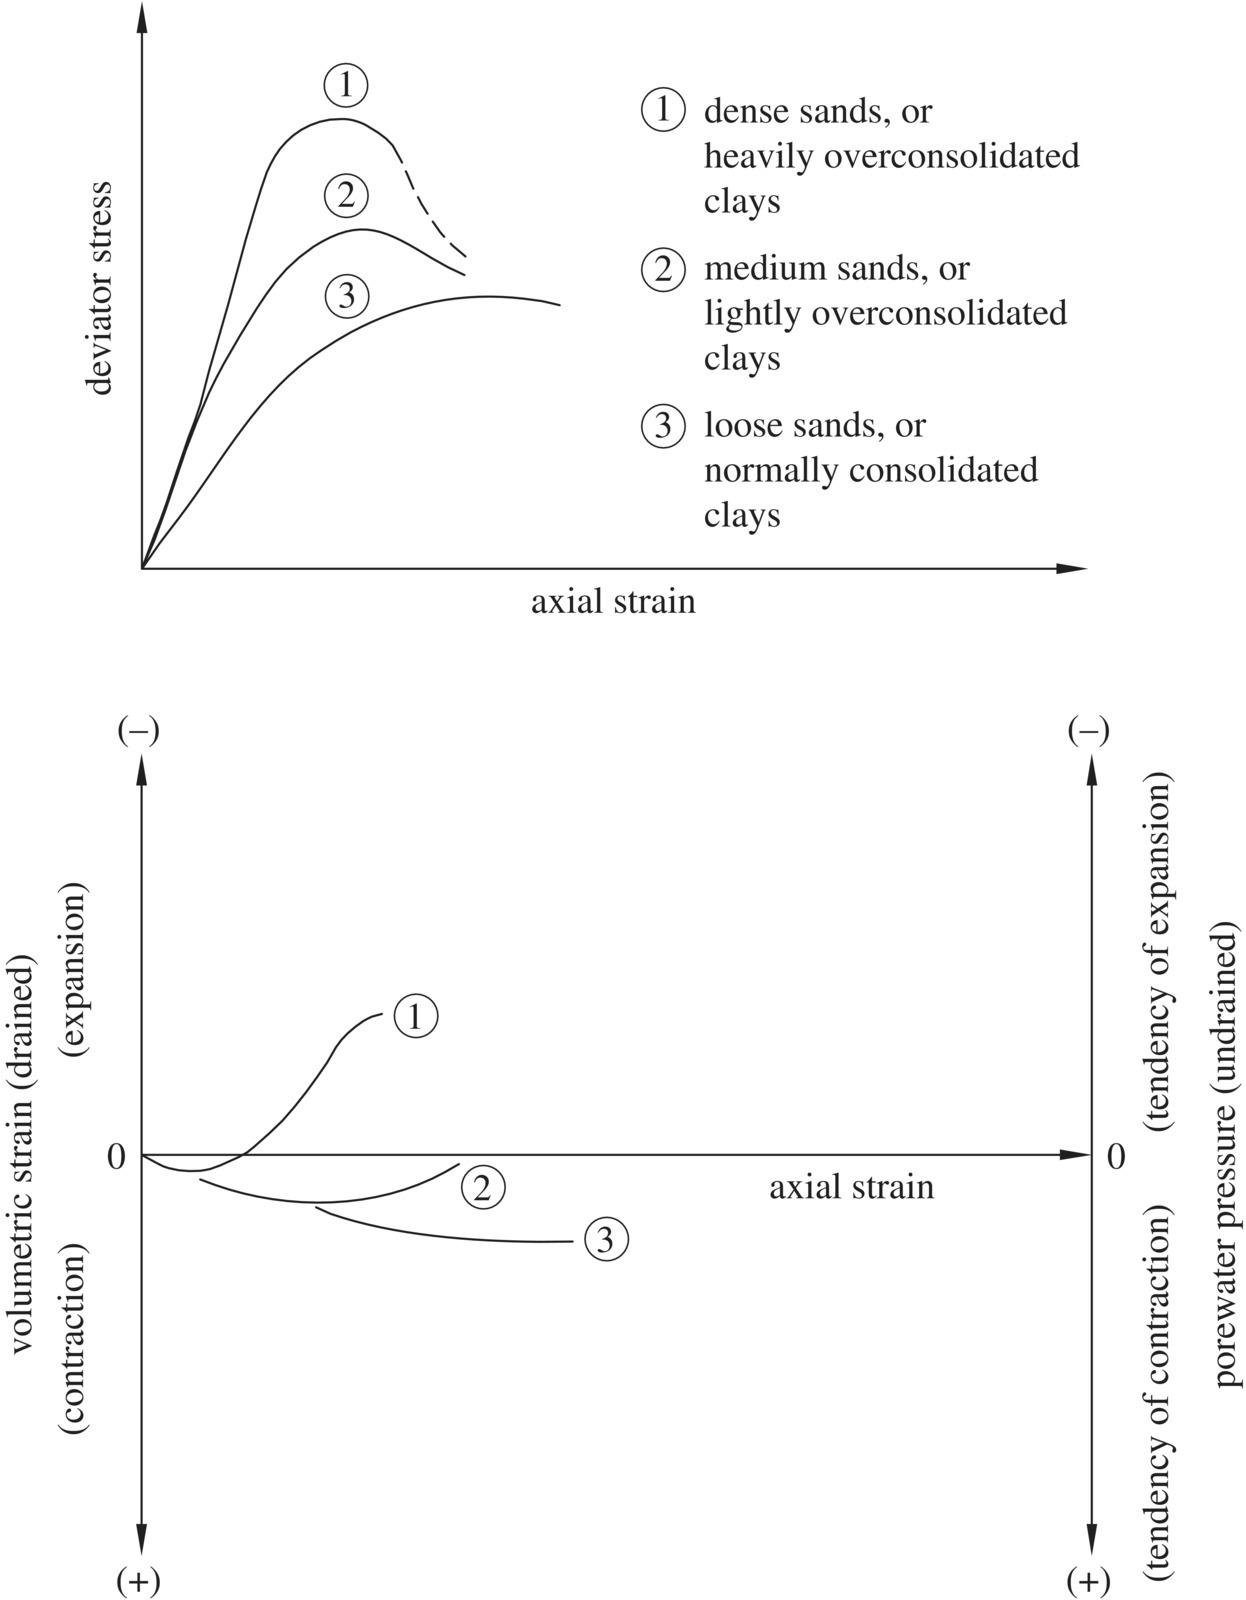 Top: graph of deviator stress vs. axial strain displaying 3 curves labeled from 1–3. Bottom: 2 Vertical 2-headed arrows centered by a horizontal rightward arrow labeled axial strain, with 3 curves labeled from 1–3.